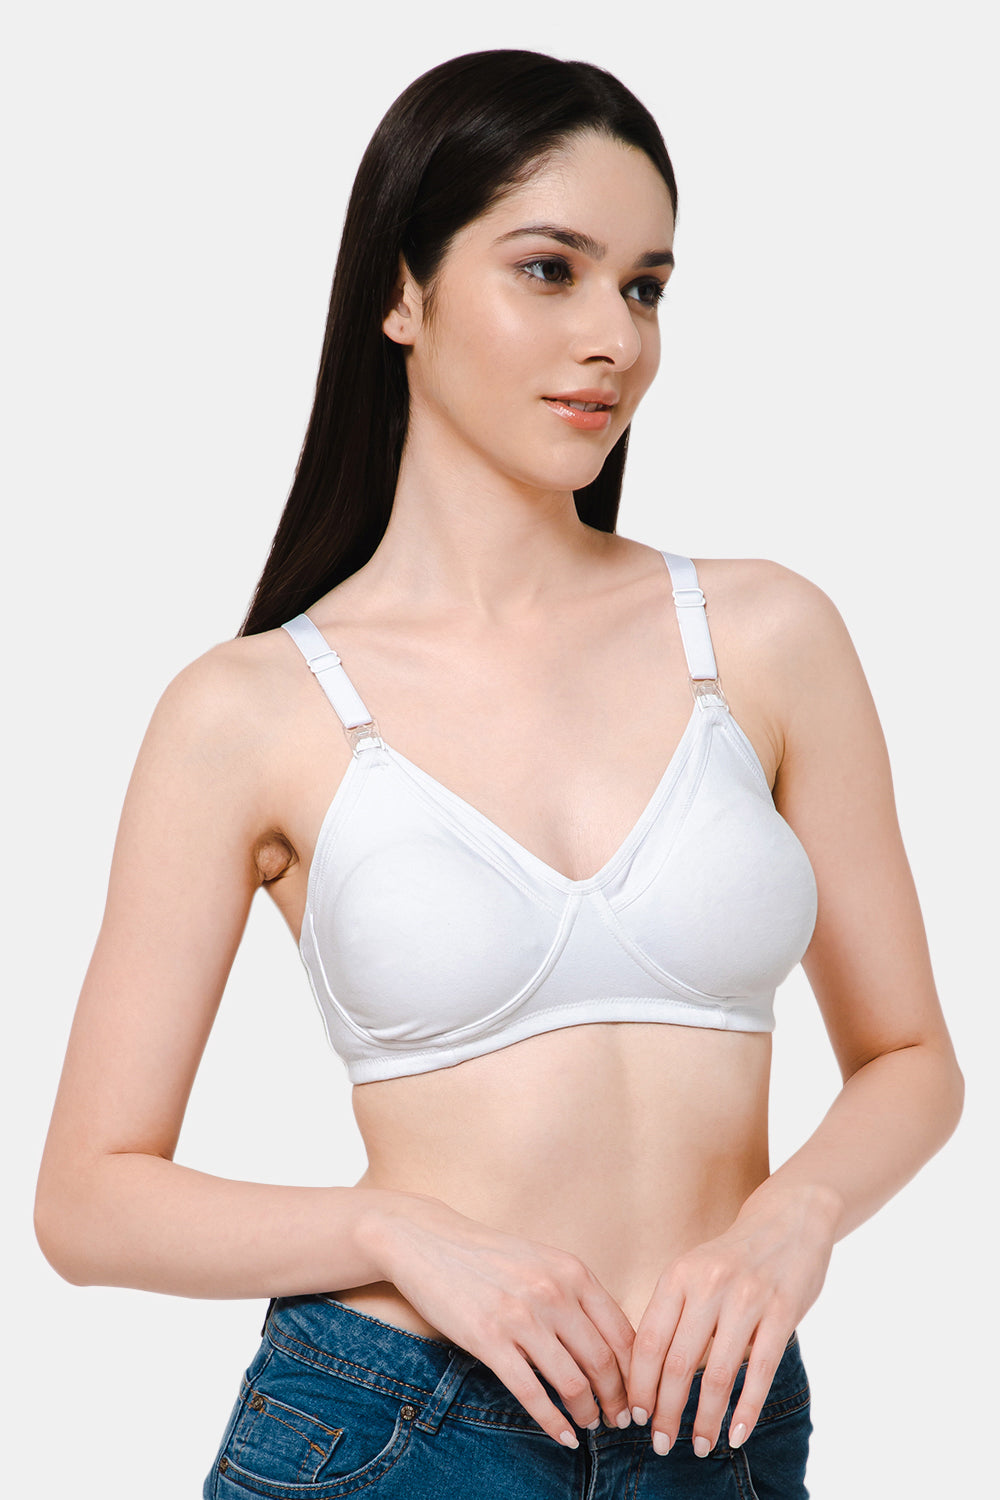 Details of Cotton Thin Maternity Nursing Bra Intimate Clothes For